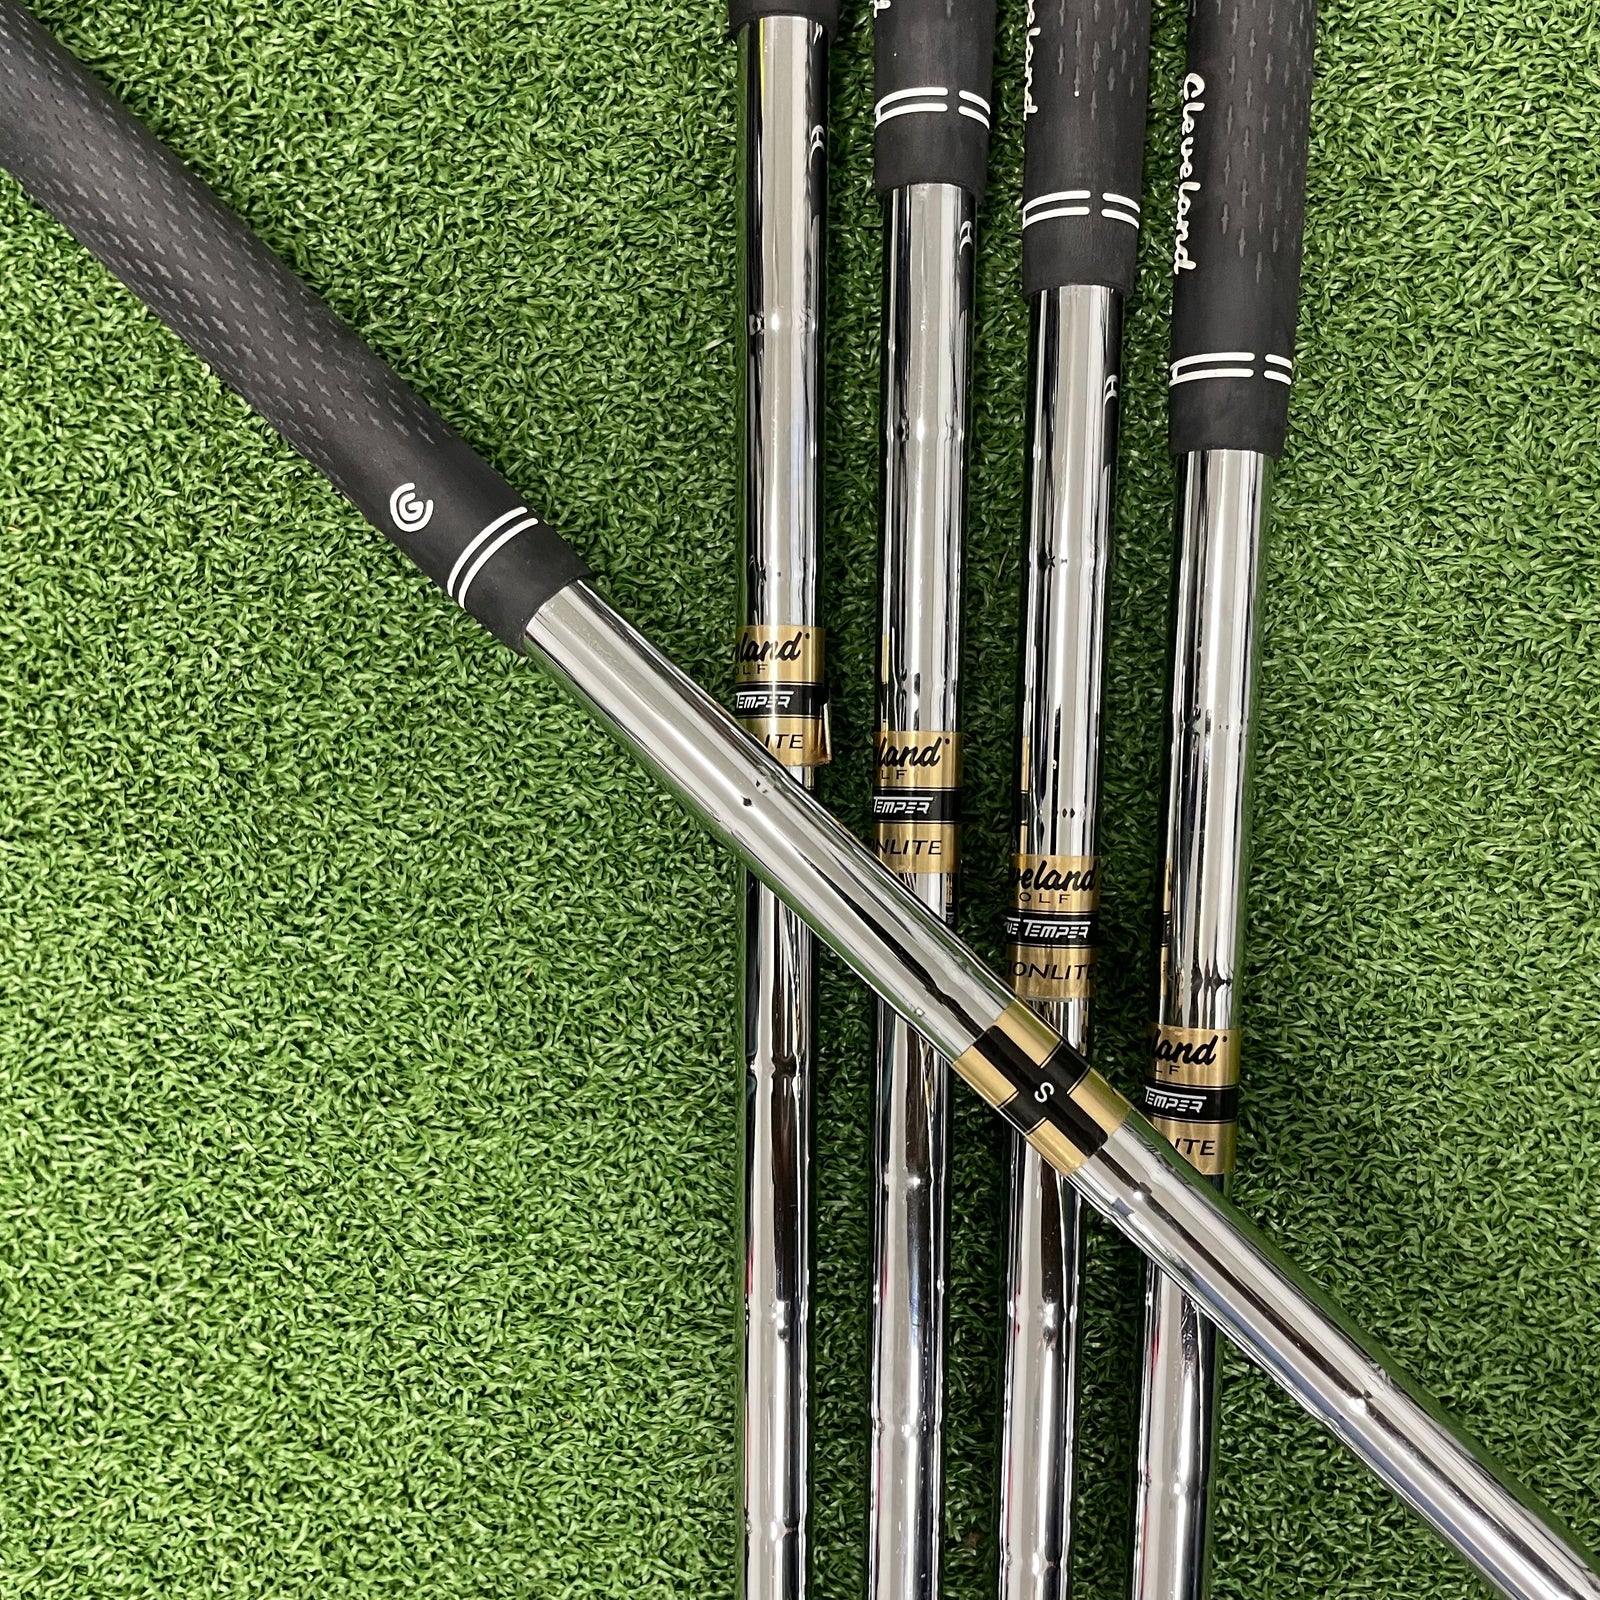 CLEVELAND CG4 6-PW 5PC IRON SET STEEL SHAFTS (S) #IS170K